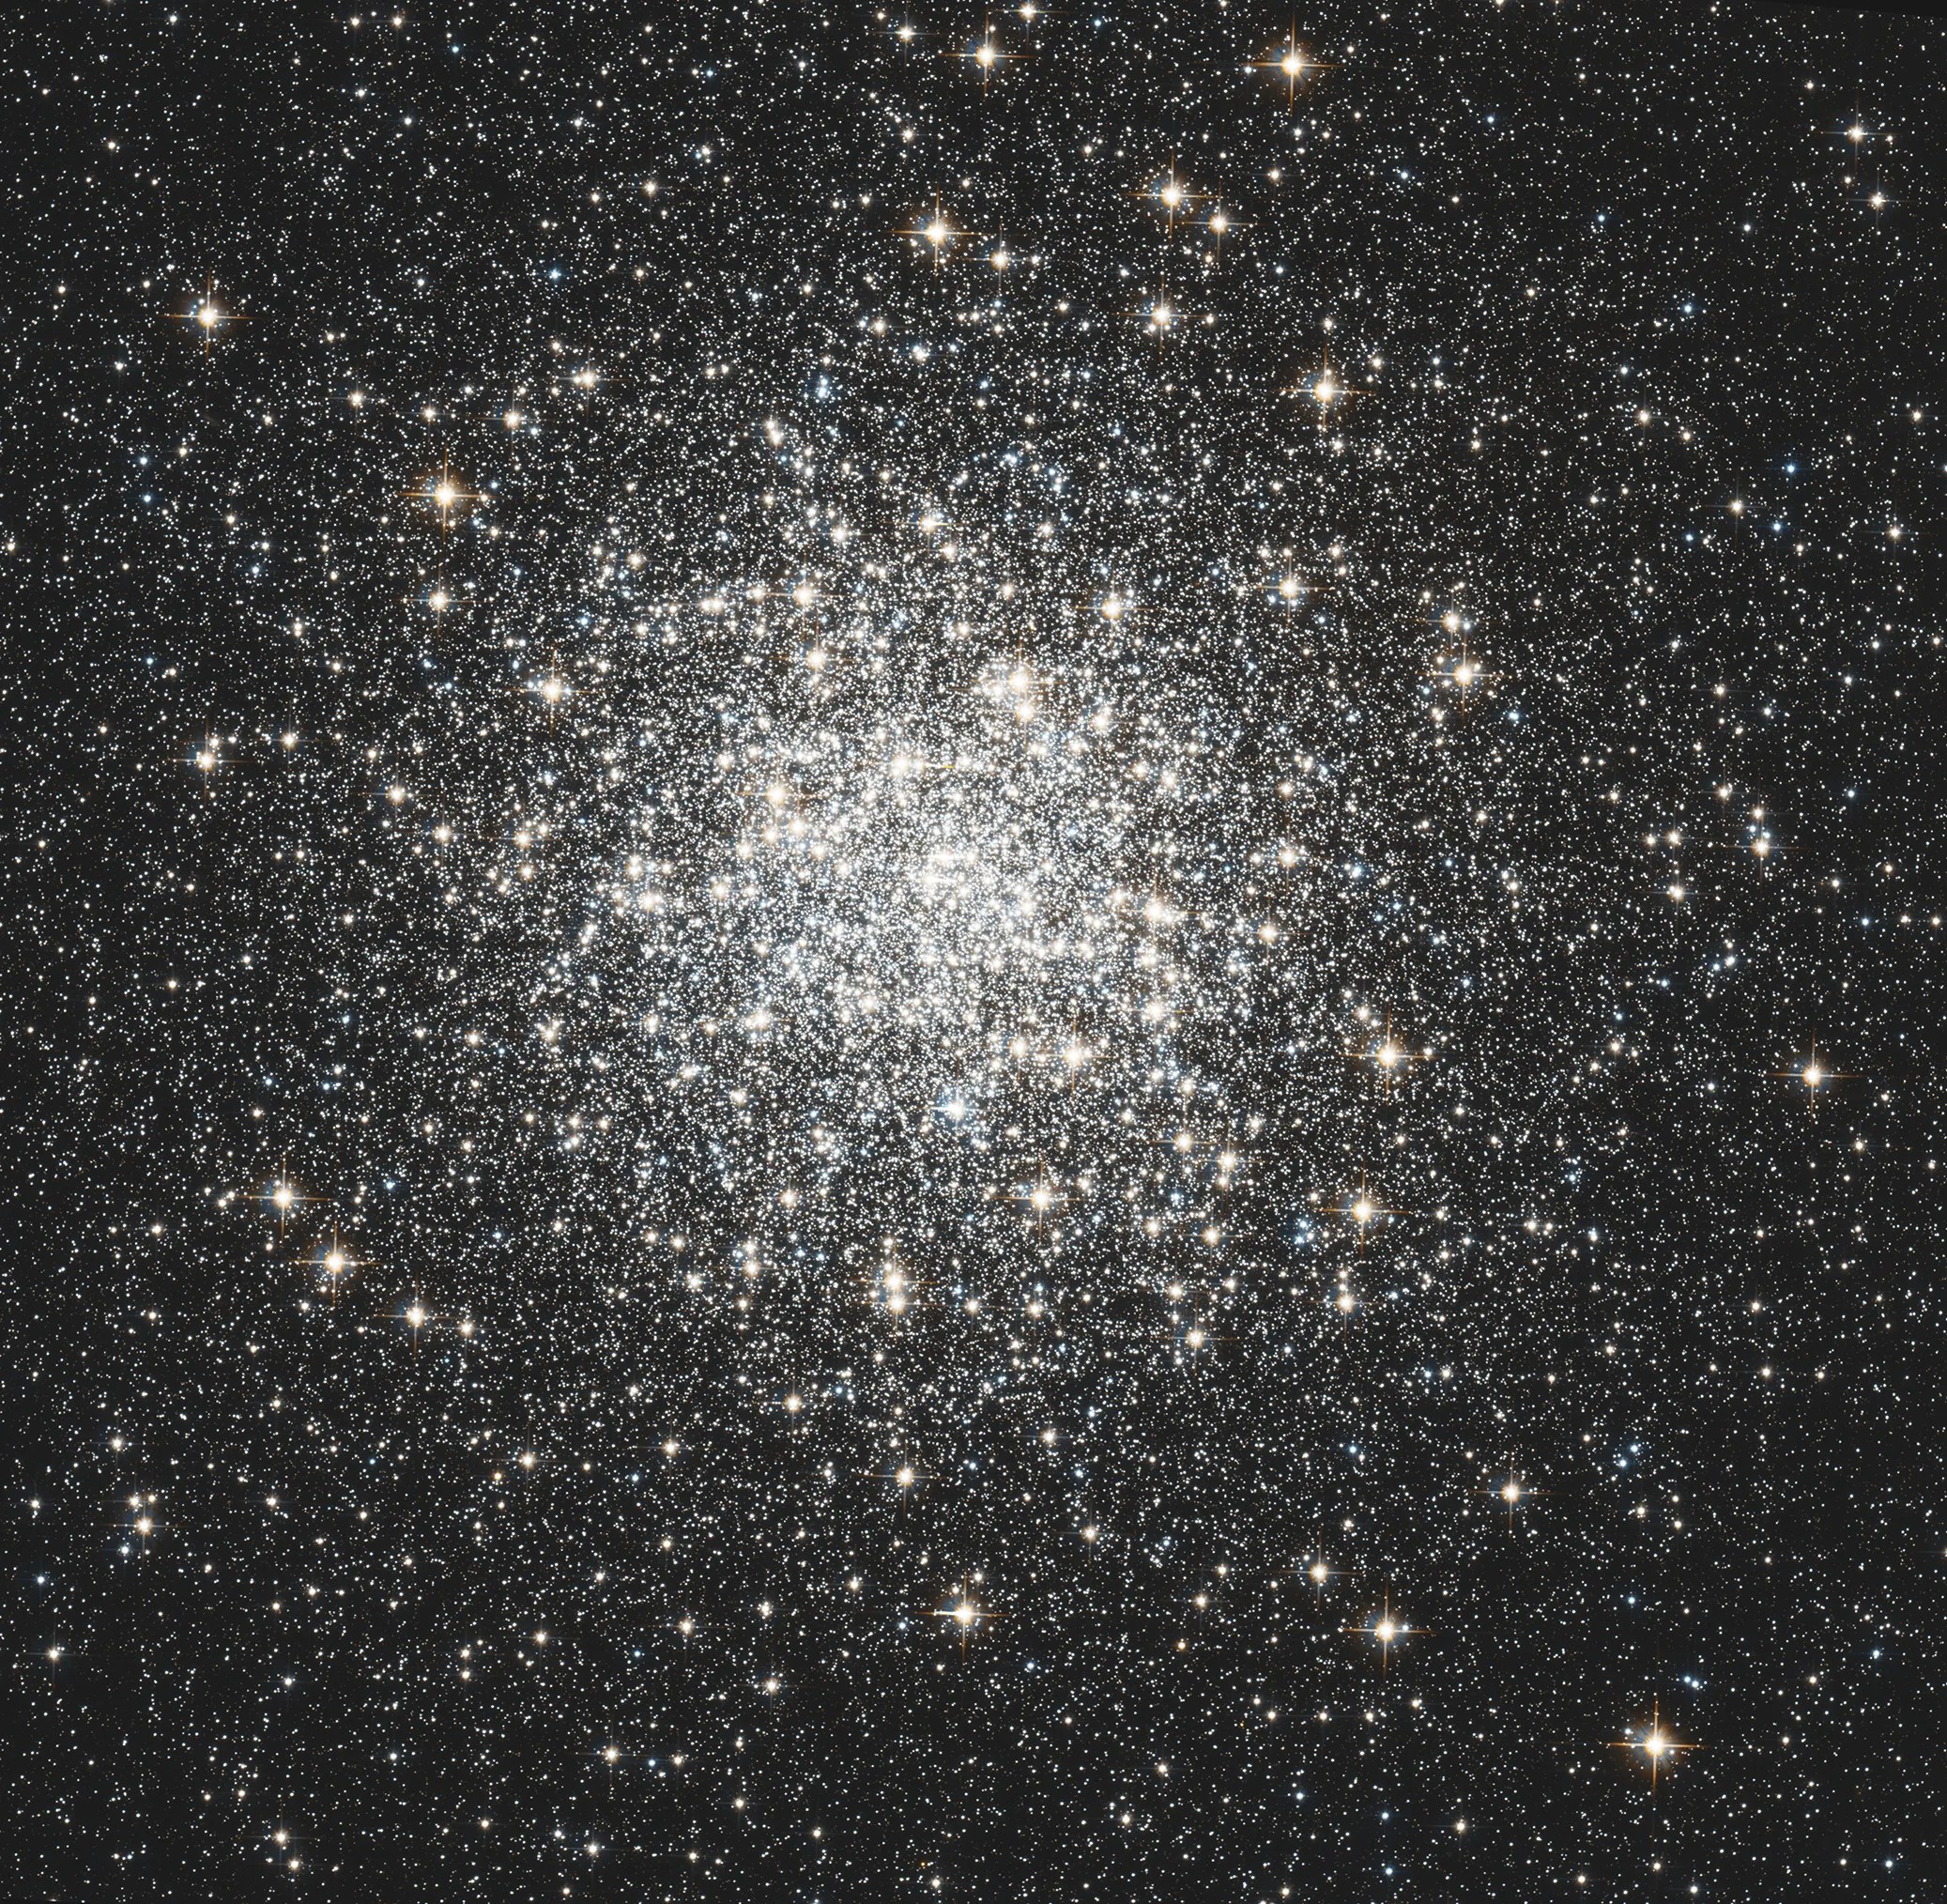 Hubble view of M3 - a ball of thousands of stars.